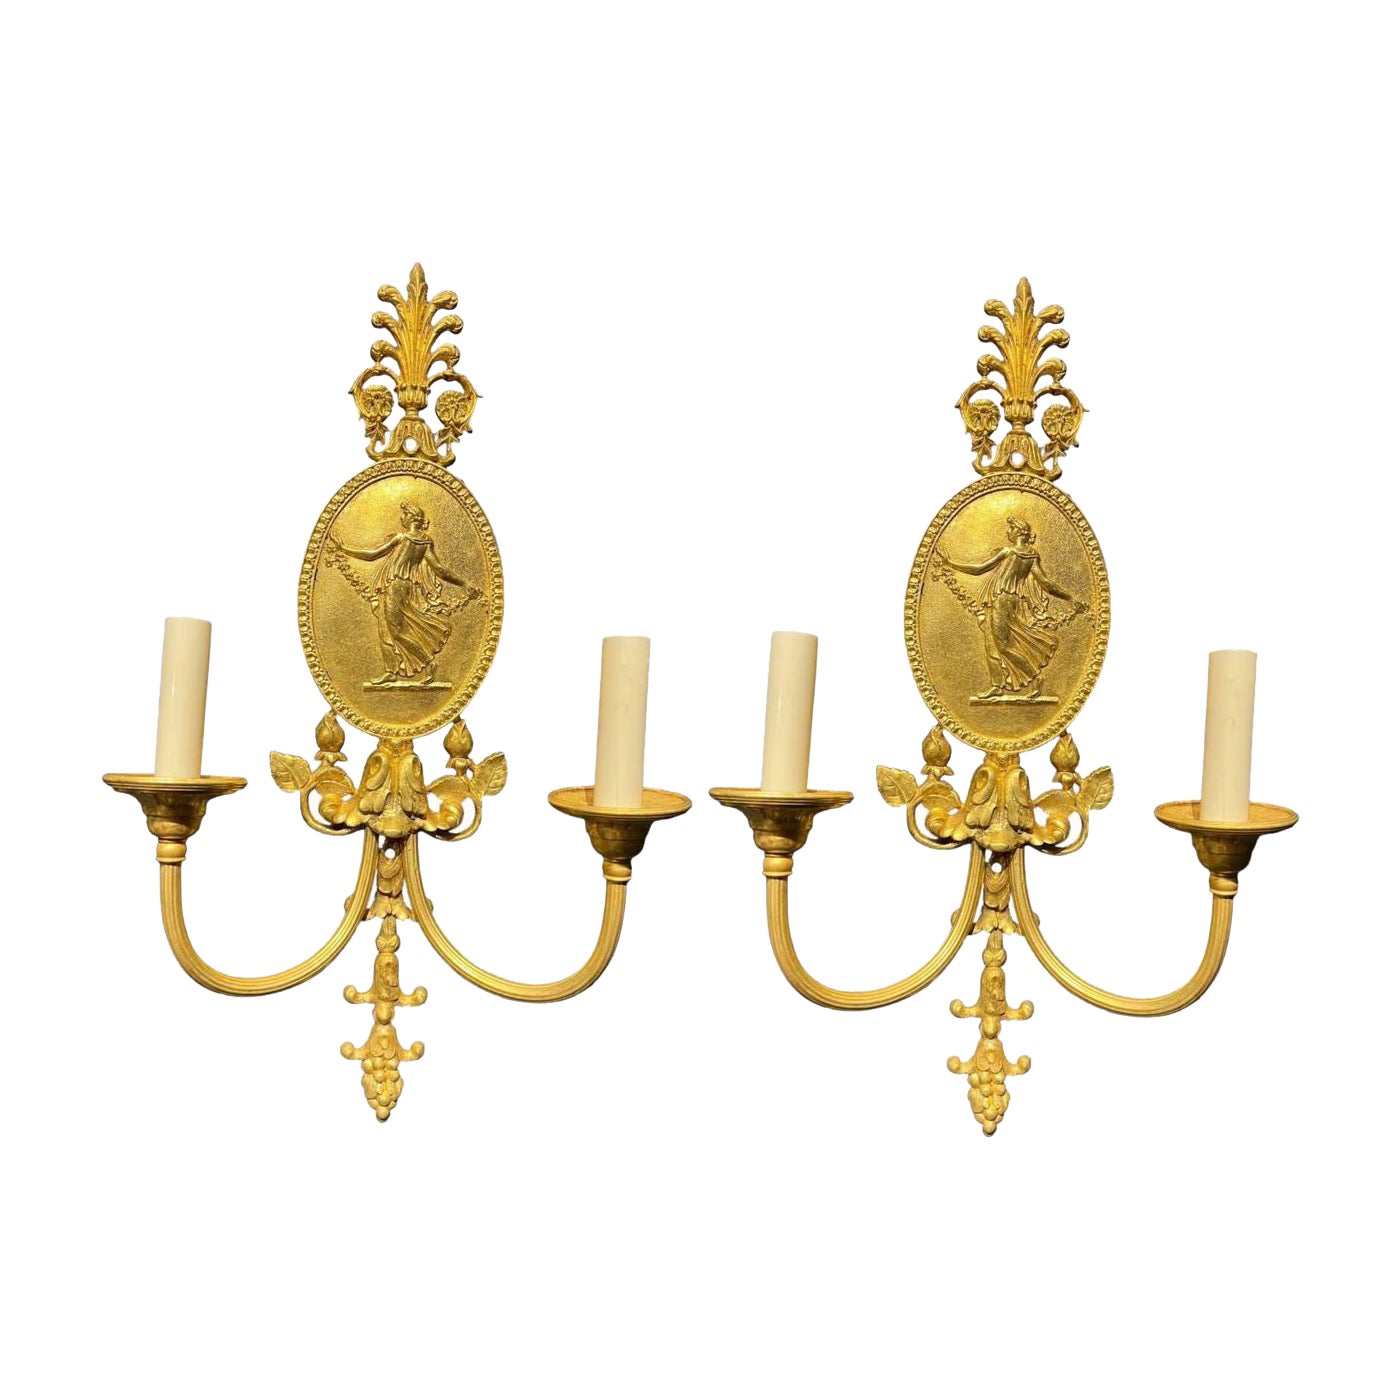 1920’s Neoclassical Style Caldwell Sconces with cameos For Sale